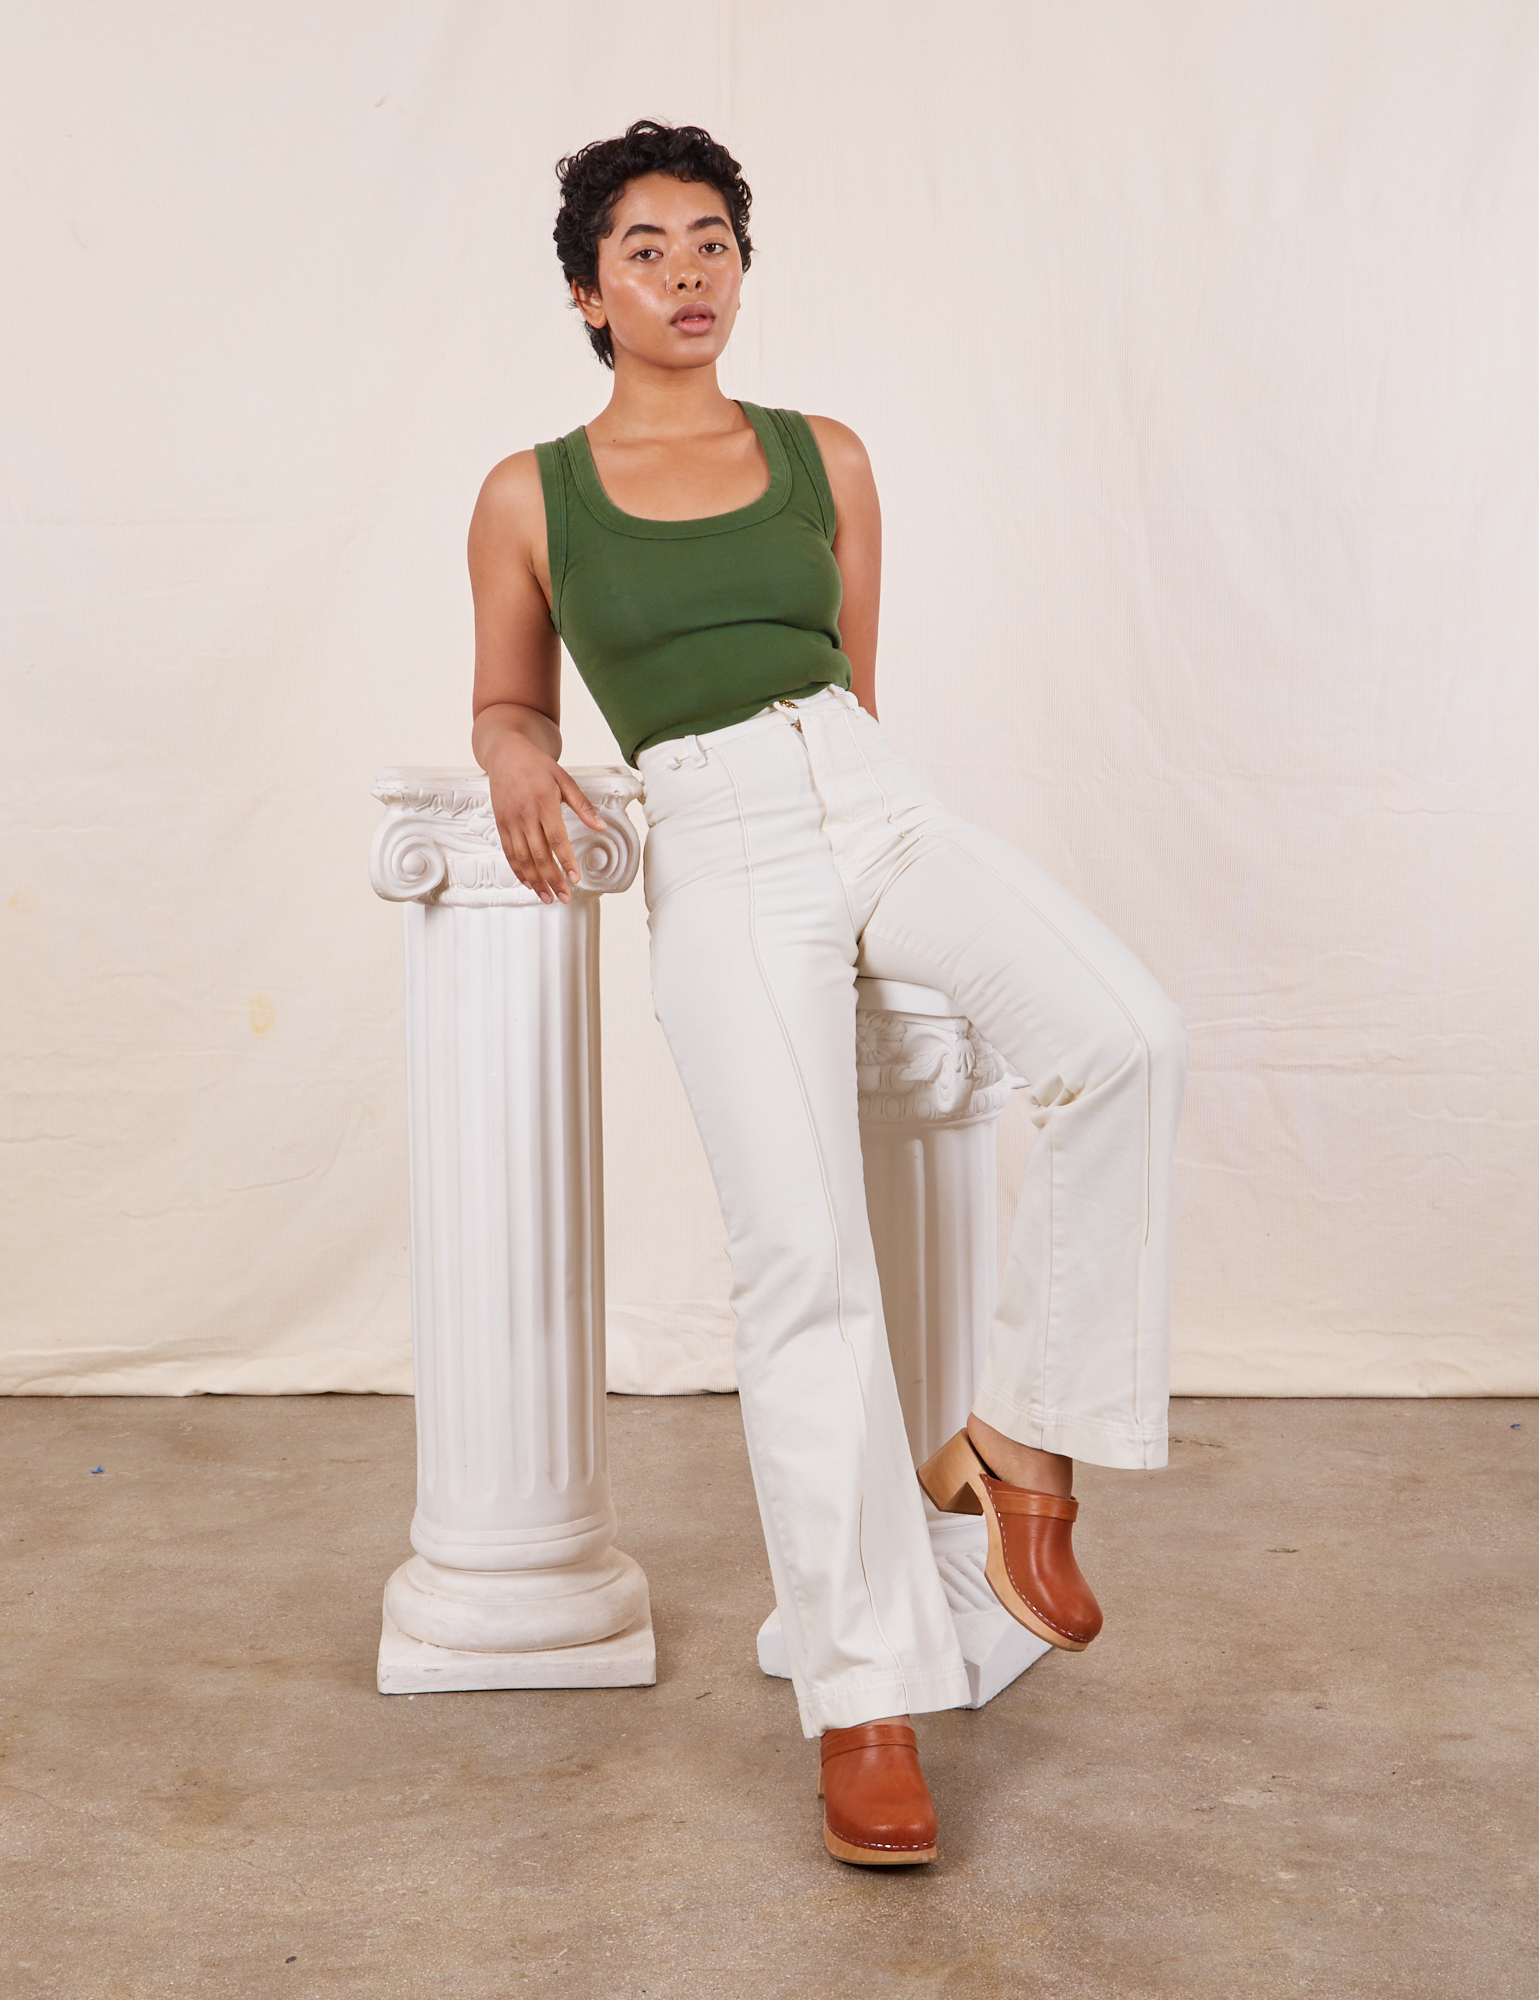 Mika is wearing Tank Top in Dark Emerald Green and vintage off-white Western Pants